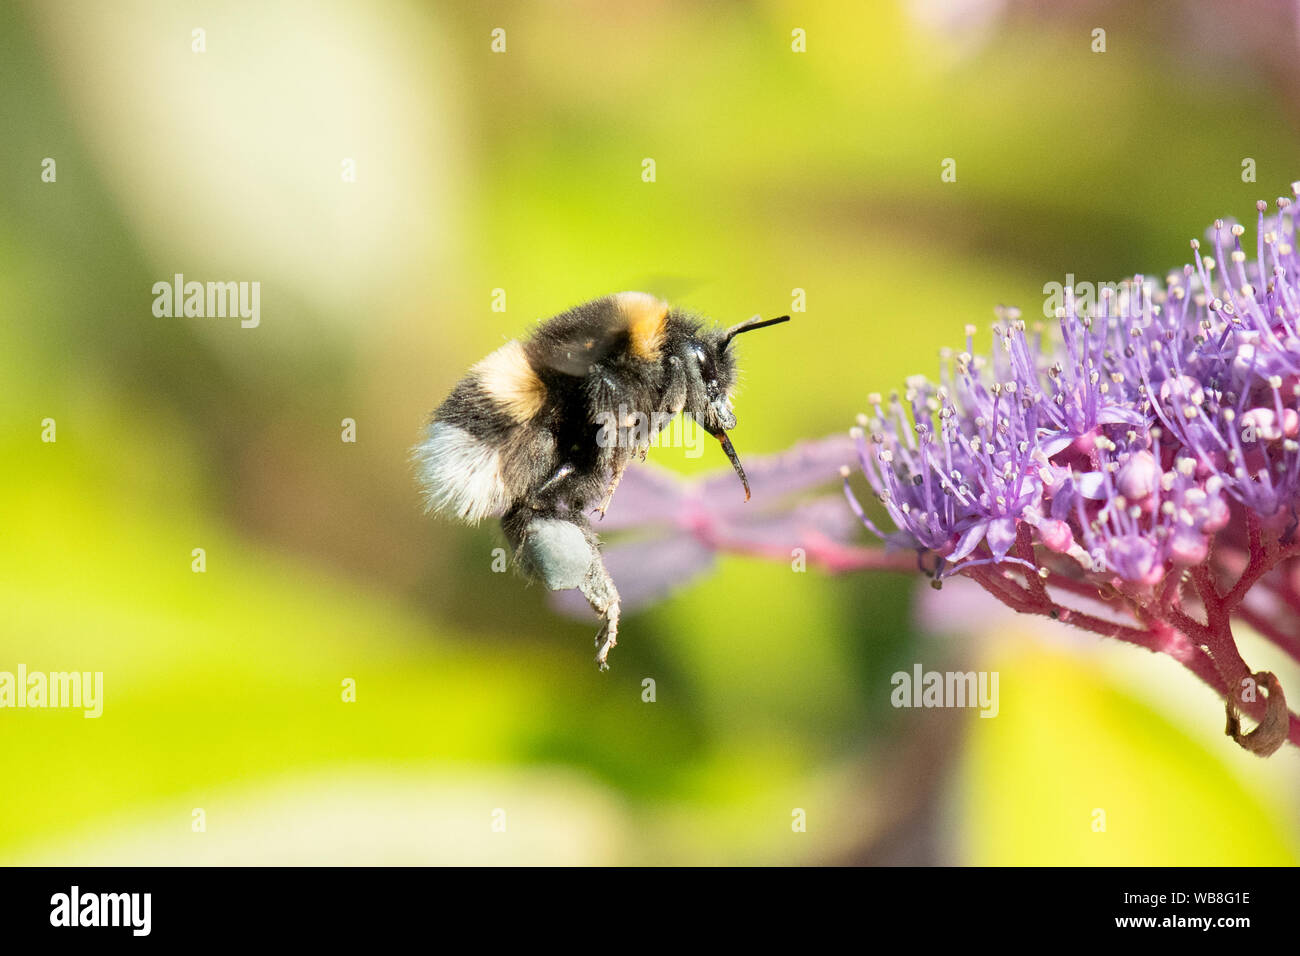 Killearn, Stirlingshire, Scotland, UK. 25th Aug, 2019. UK weather - a bumblebee dusted with blue pollen and blue pollen baskets on its legs flying towards a hydrangea flower on a hot sunny day in Stirlingshire. Pollen colour varies depending on the species of plant from which bees collect pollen and can vary from white to dark blue. Credit: Kay Roxby/Alamy Live News Stock Photo